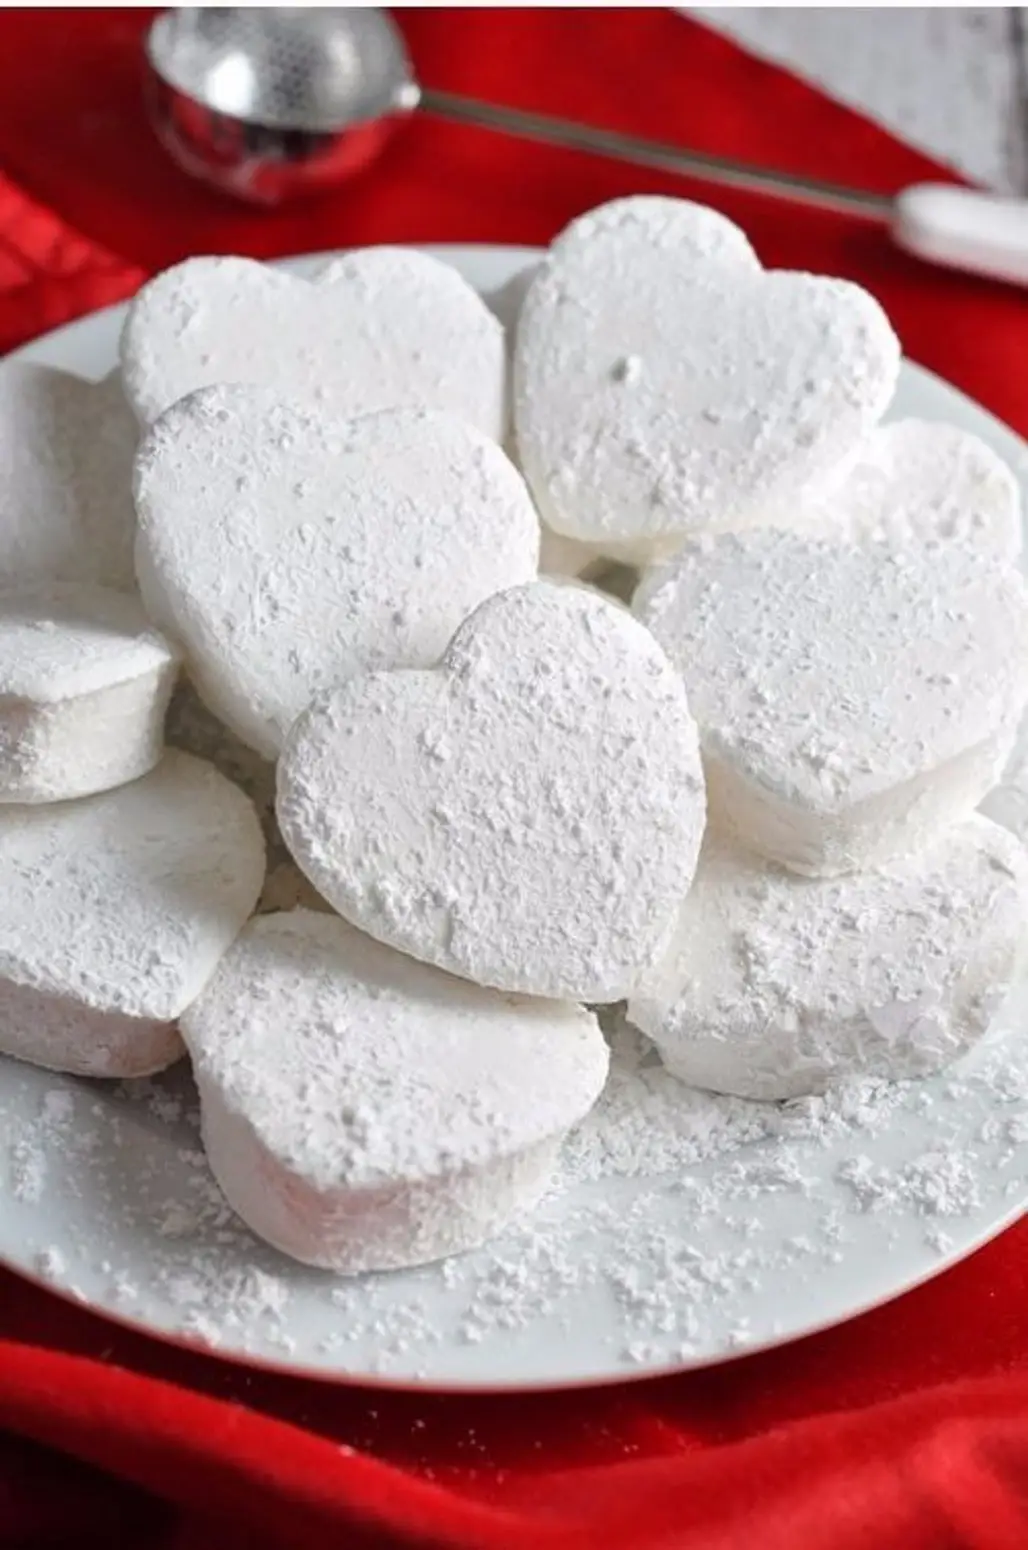 Rich and Creamy Homemade Marshmallows